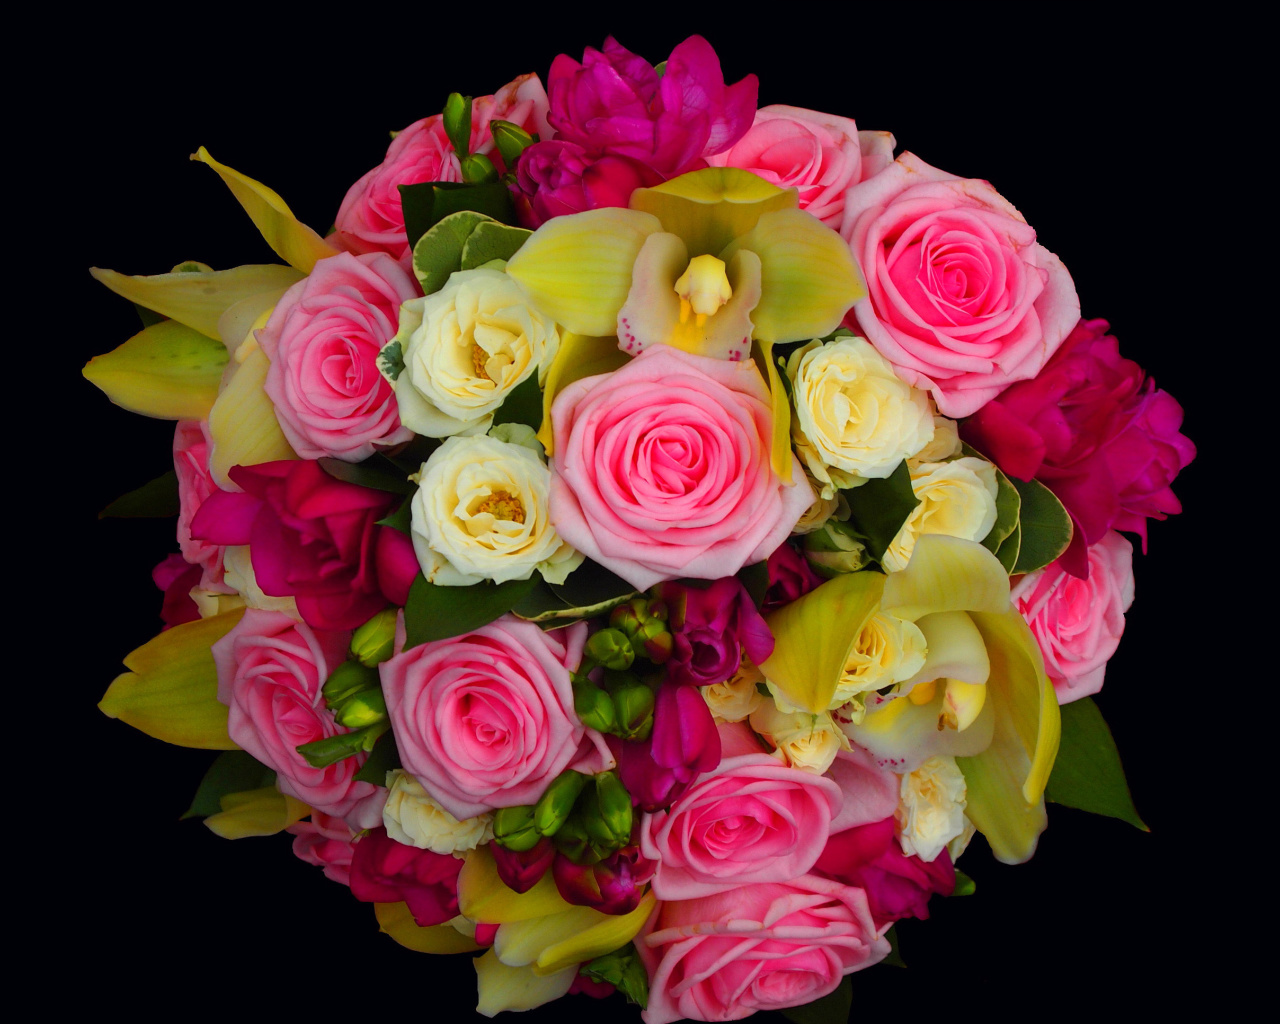 Das Bouquet of roses and yellow orchid, floristry Wallpaper 1280x1024